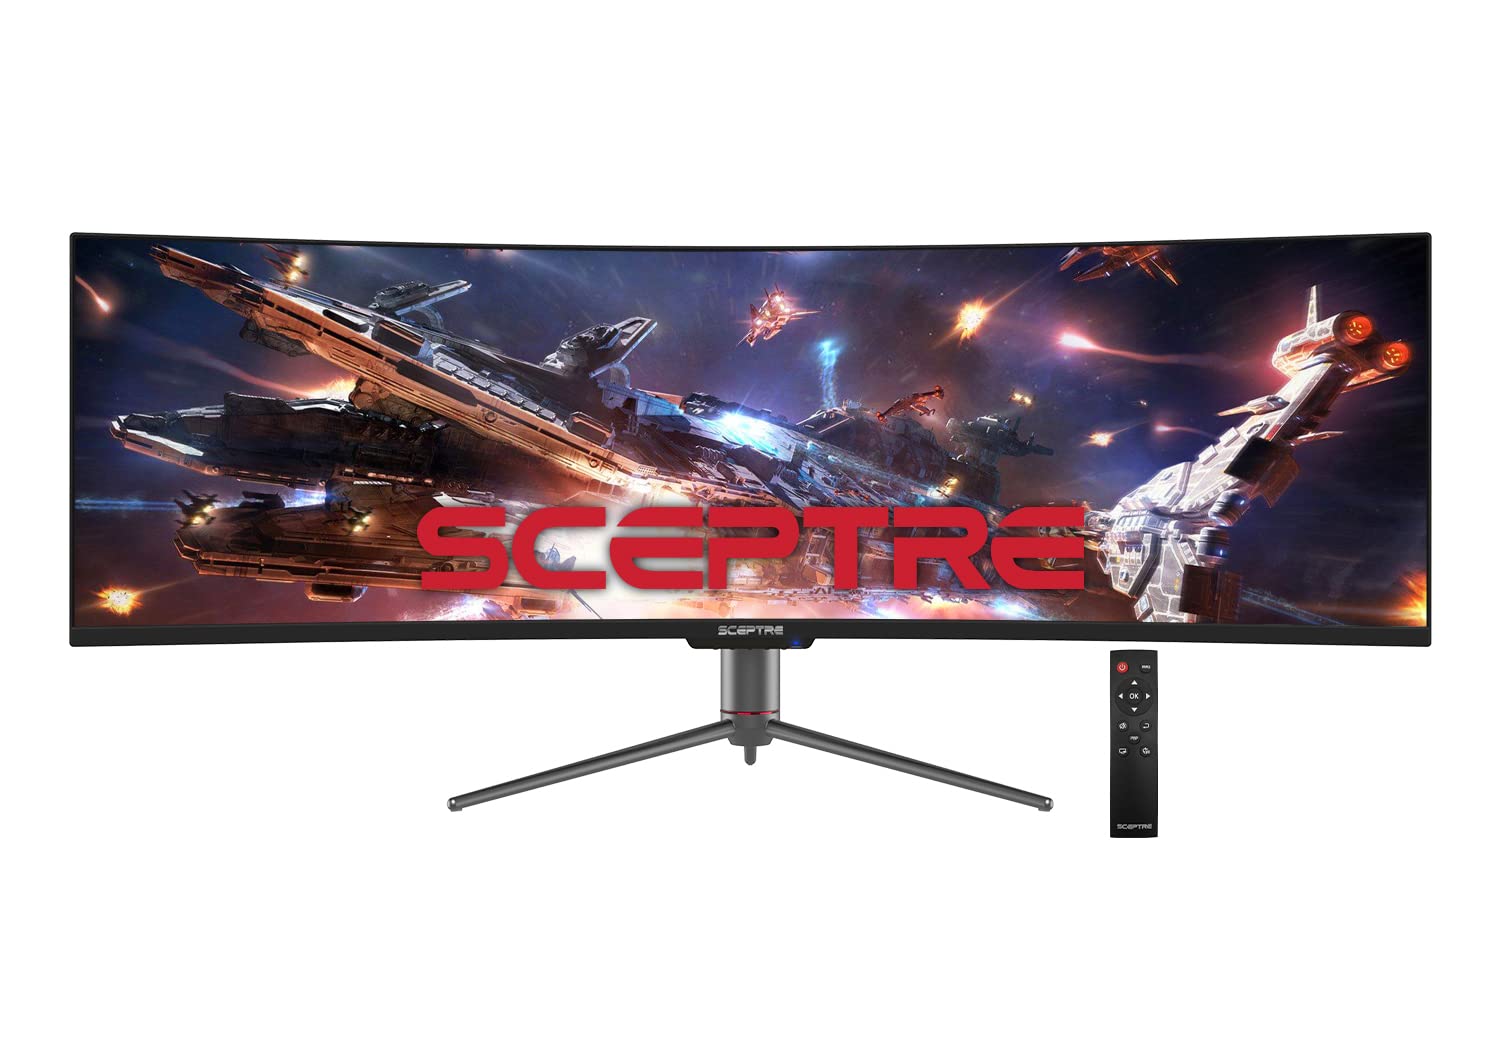 Sceptre Curved 49 inch (5120x1440) Dual QHD 32:9 Gaming Monitor up to 120Hz DisplayPort HDMI Build-in Speakers, Gunmetal Black 2021 (C505B-QSN168)